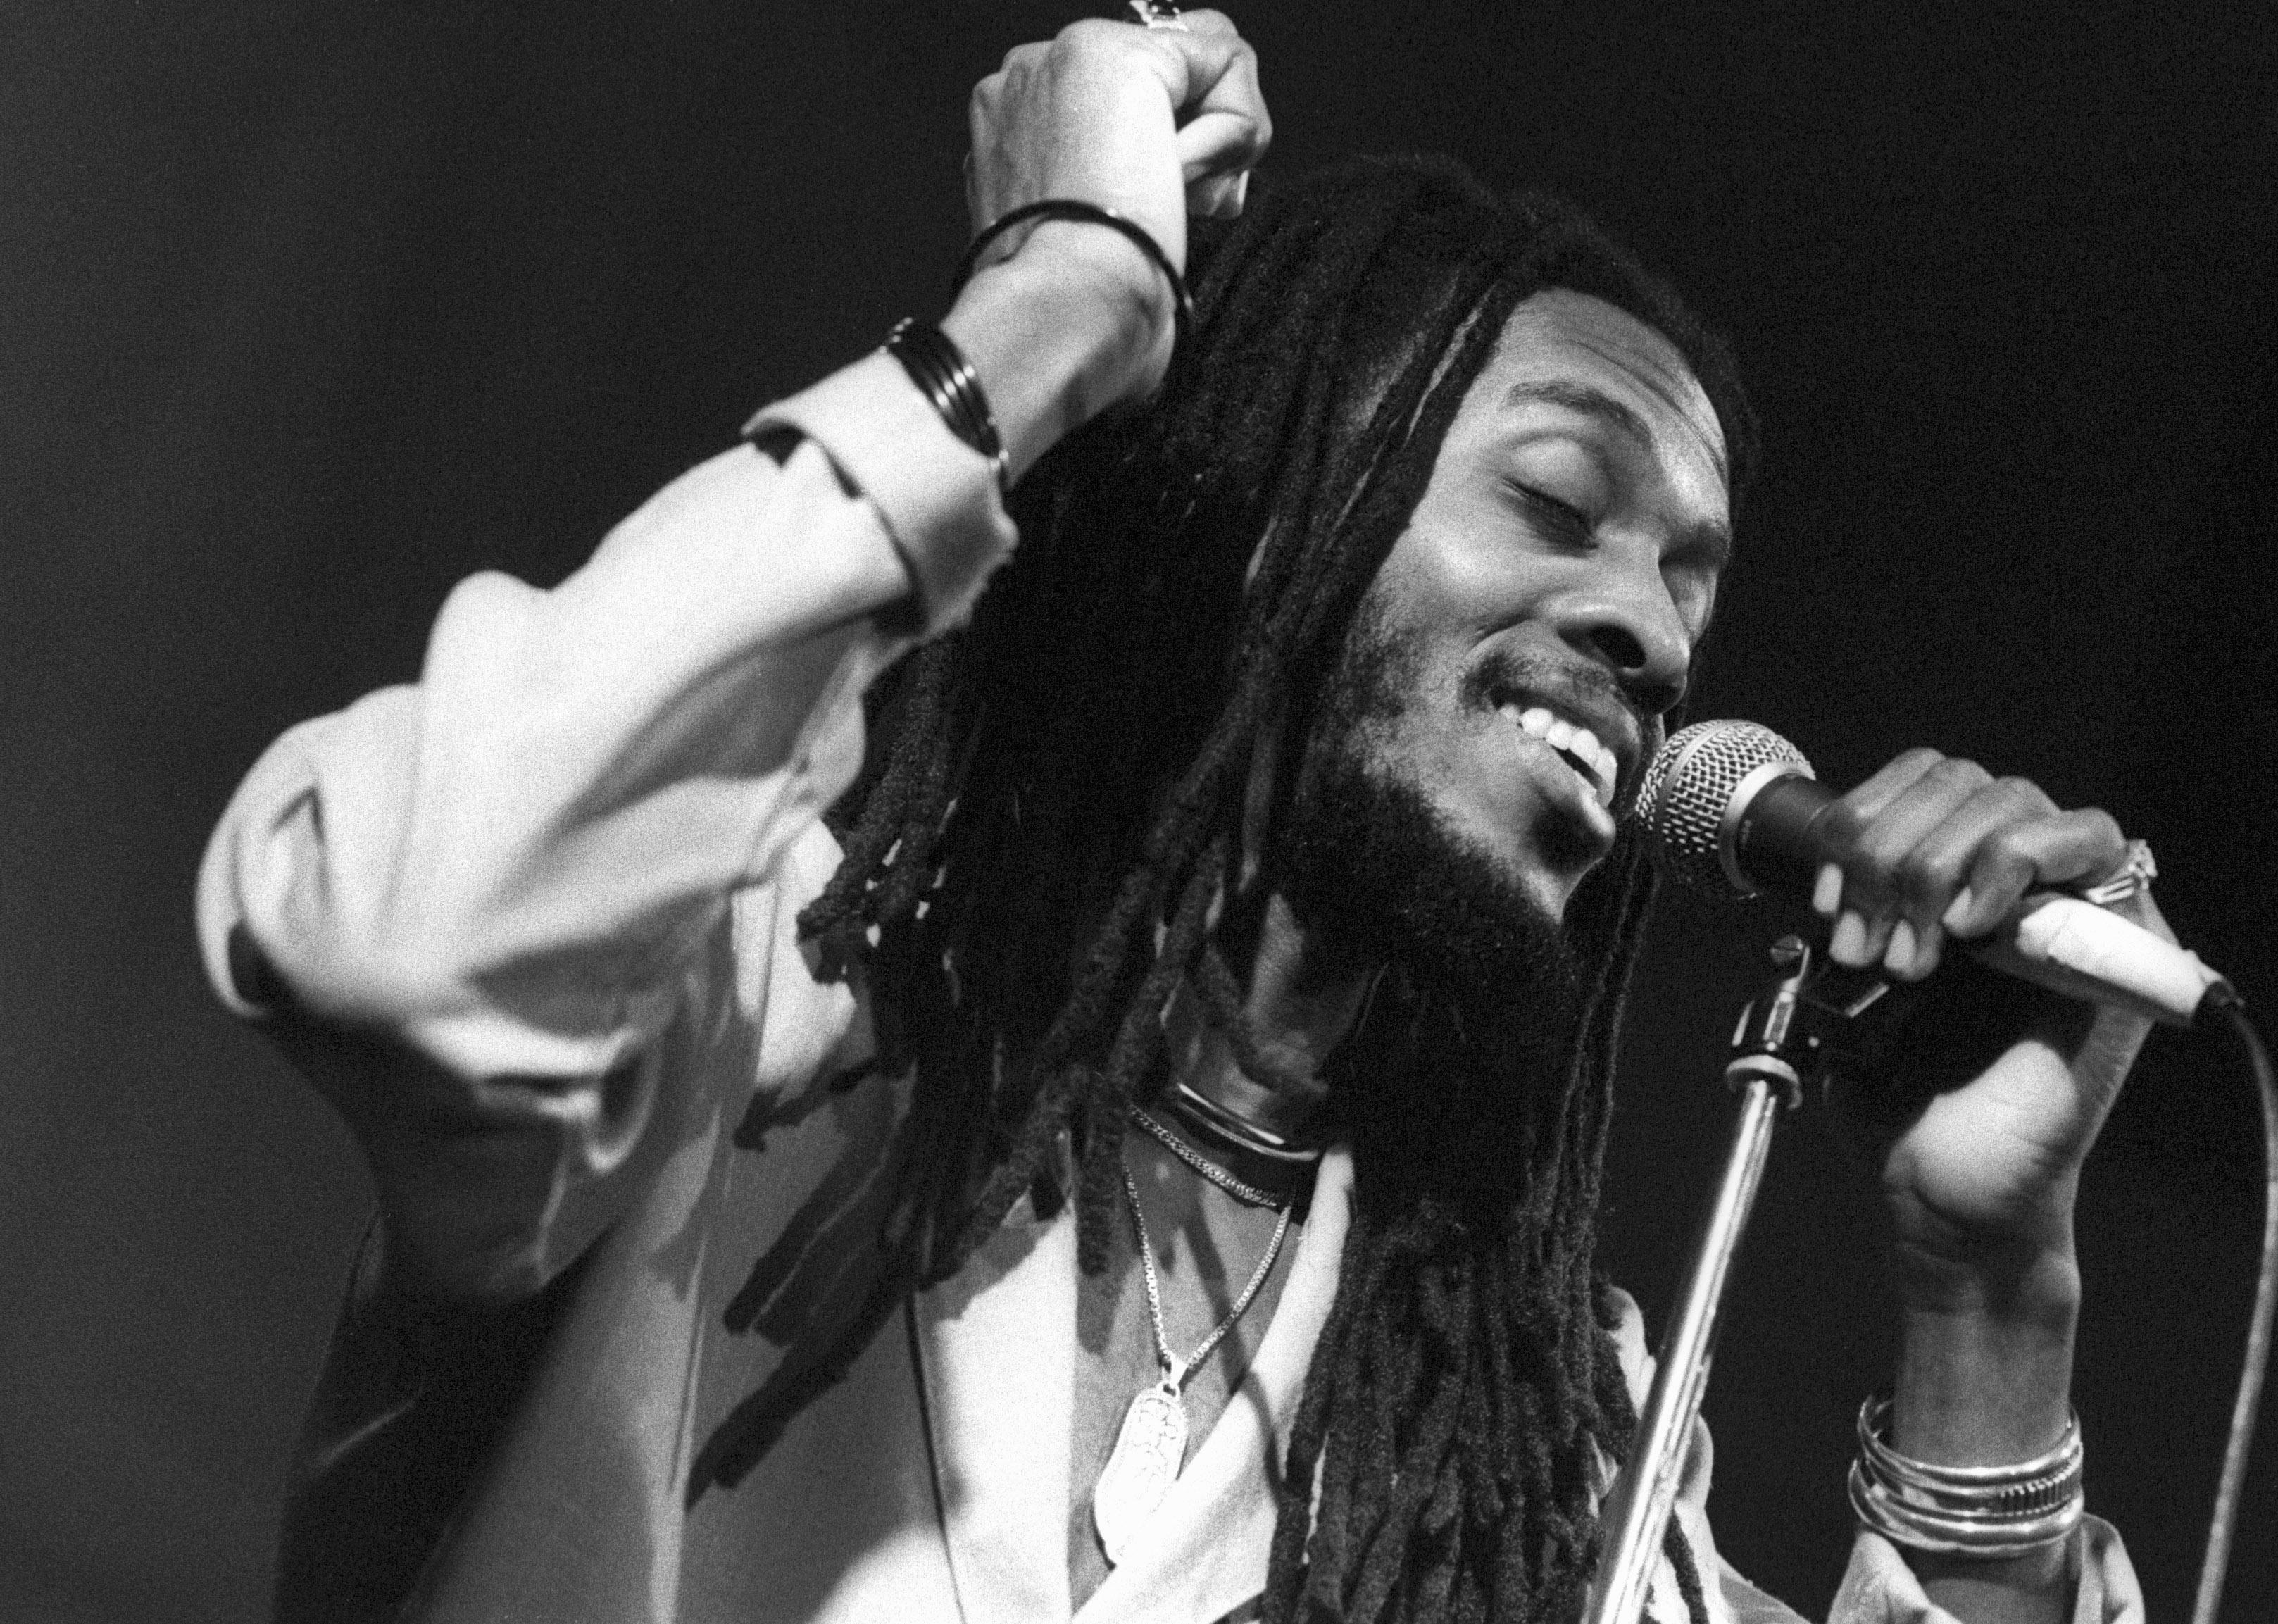 Ini Kamoze performs live on stage.